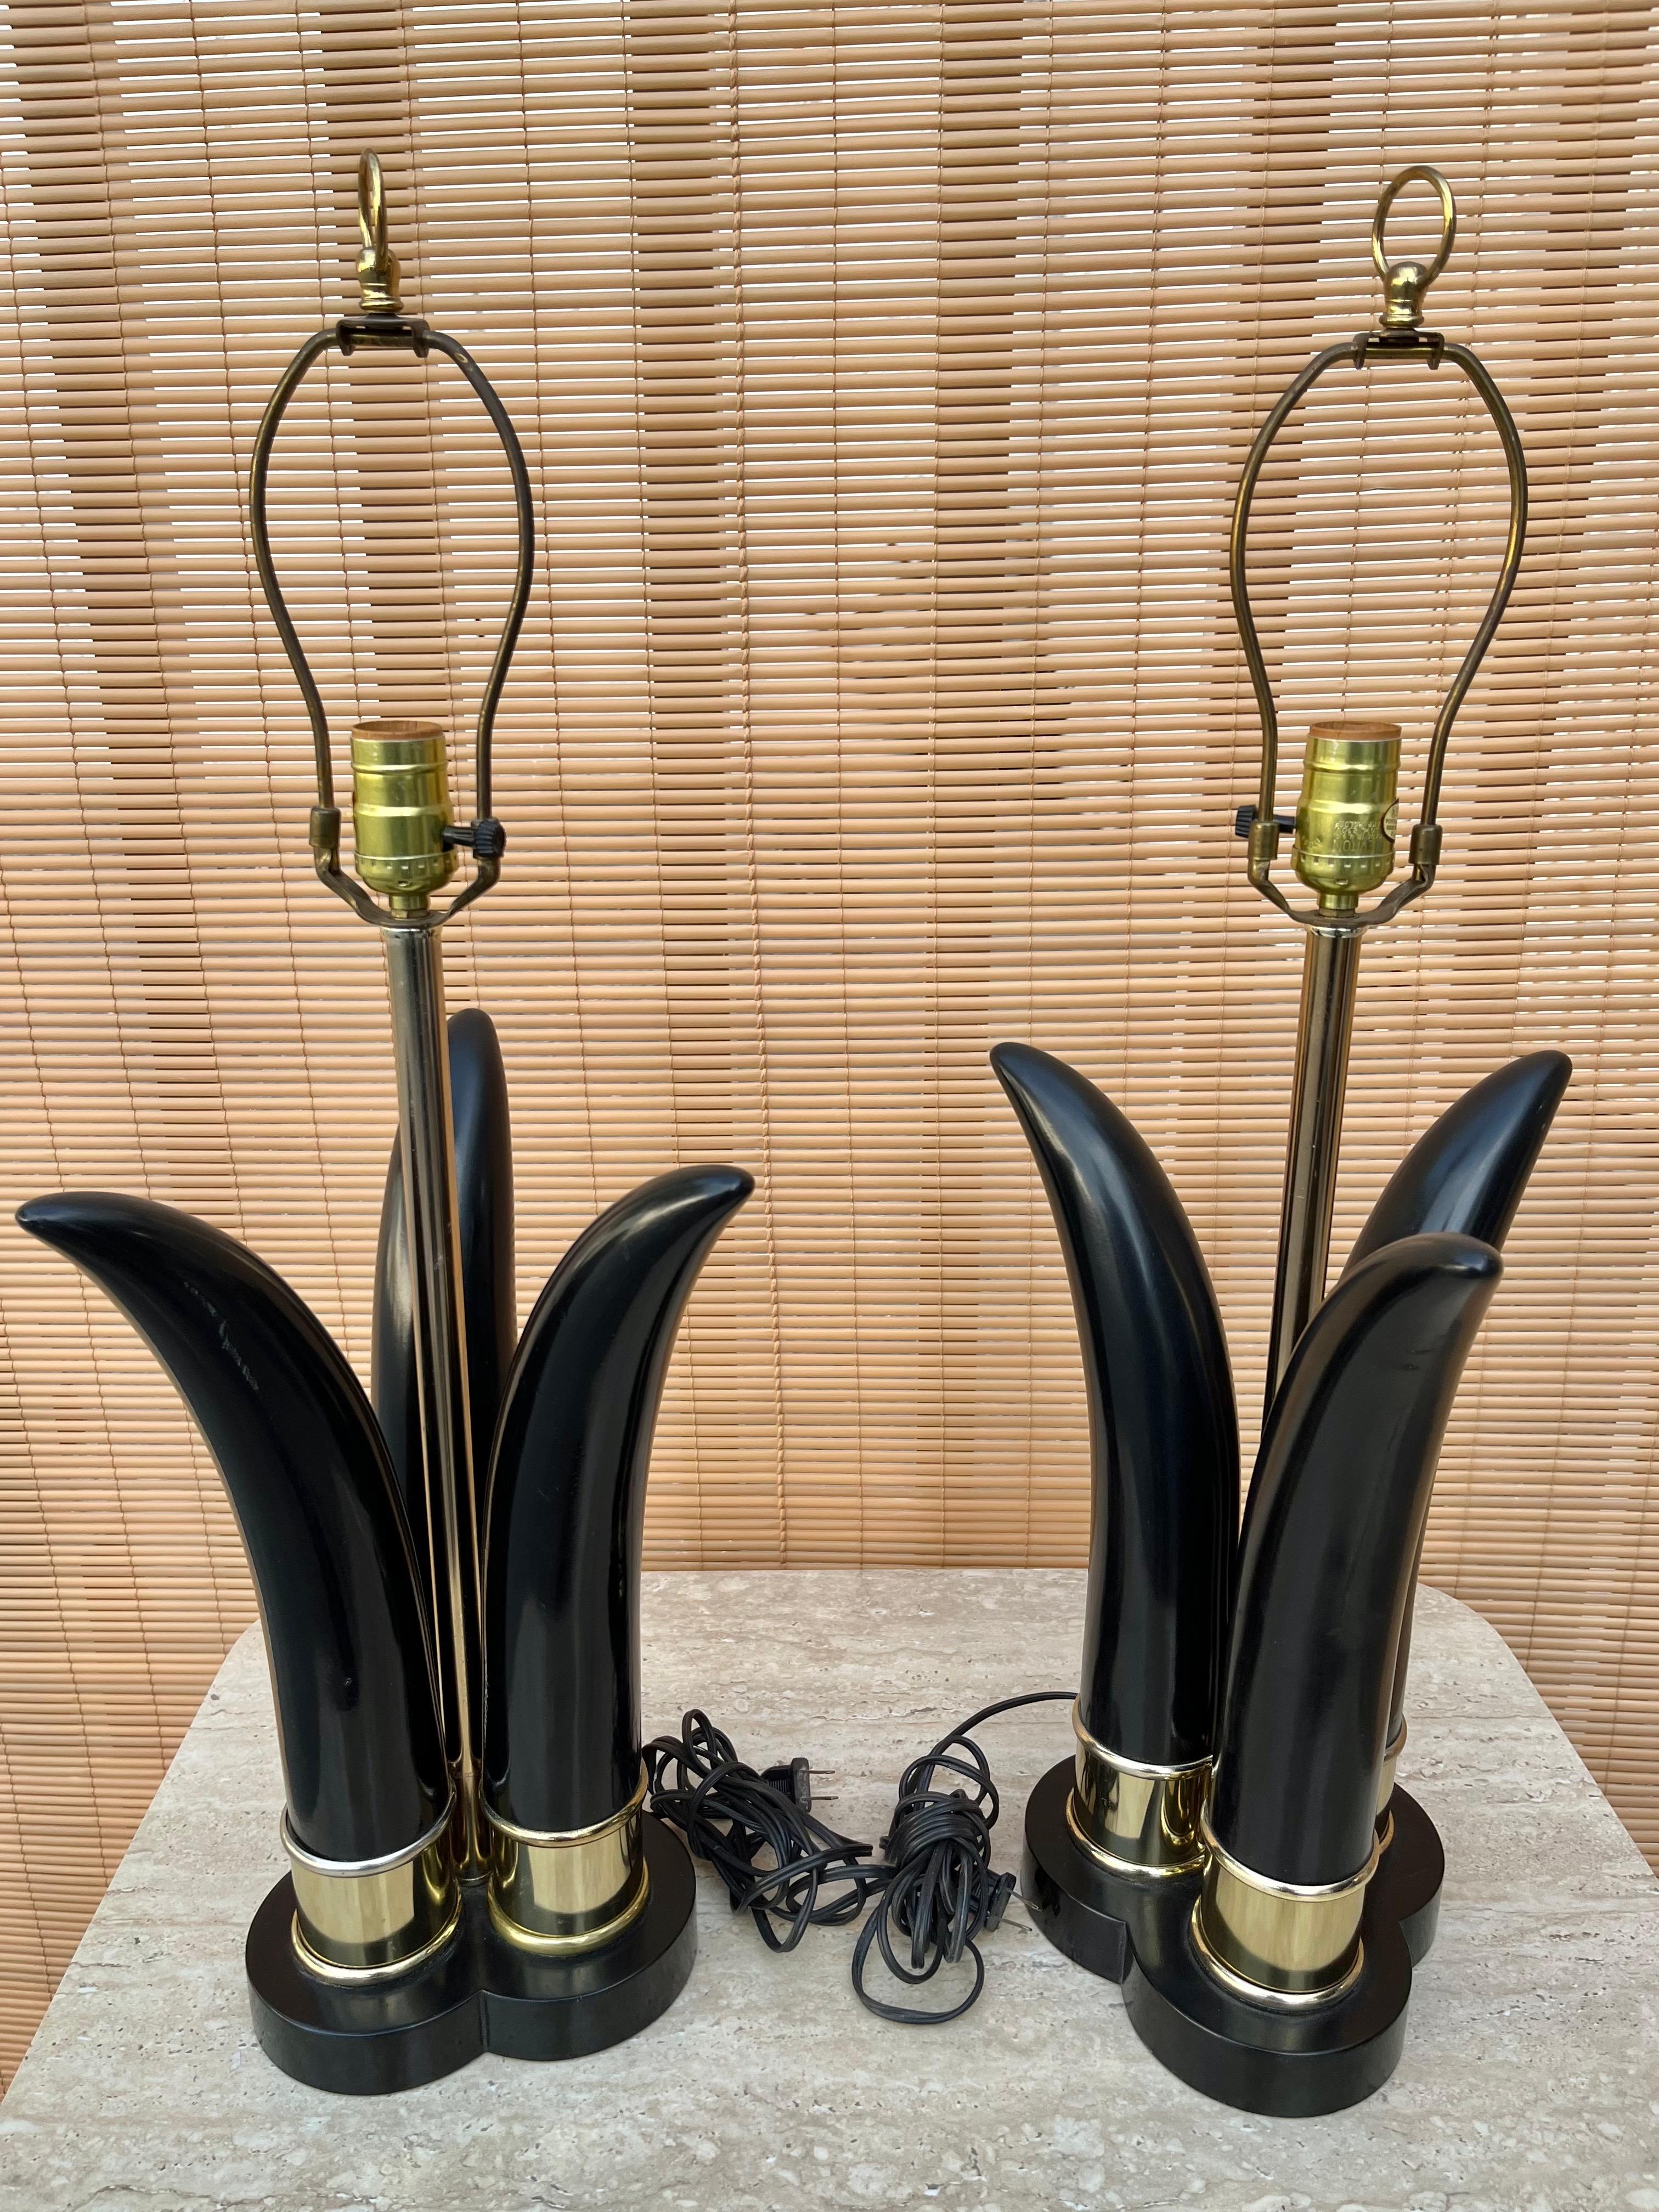 Pair of Mid-Century Modern Sculptural Black and Brass Table Lamps For Sale 1